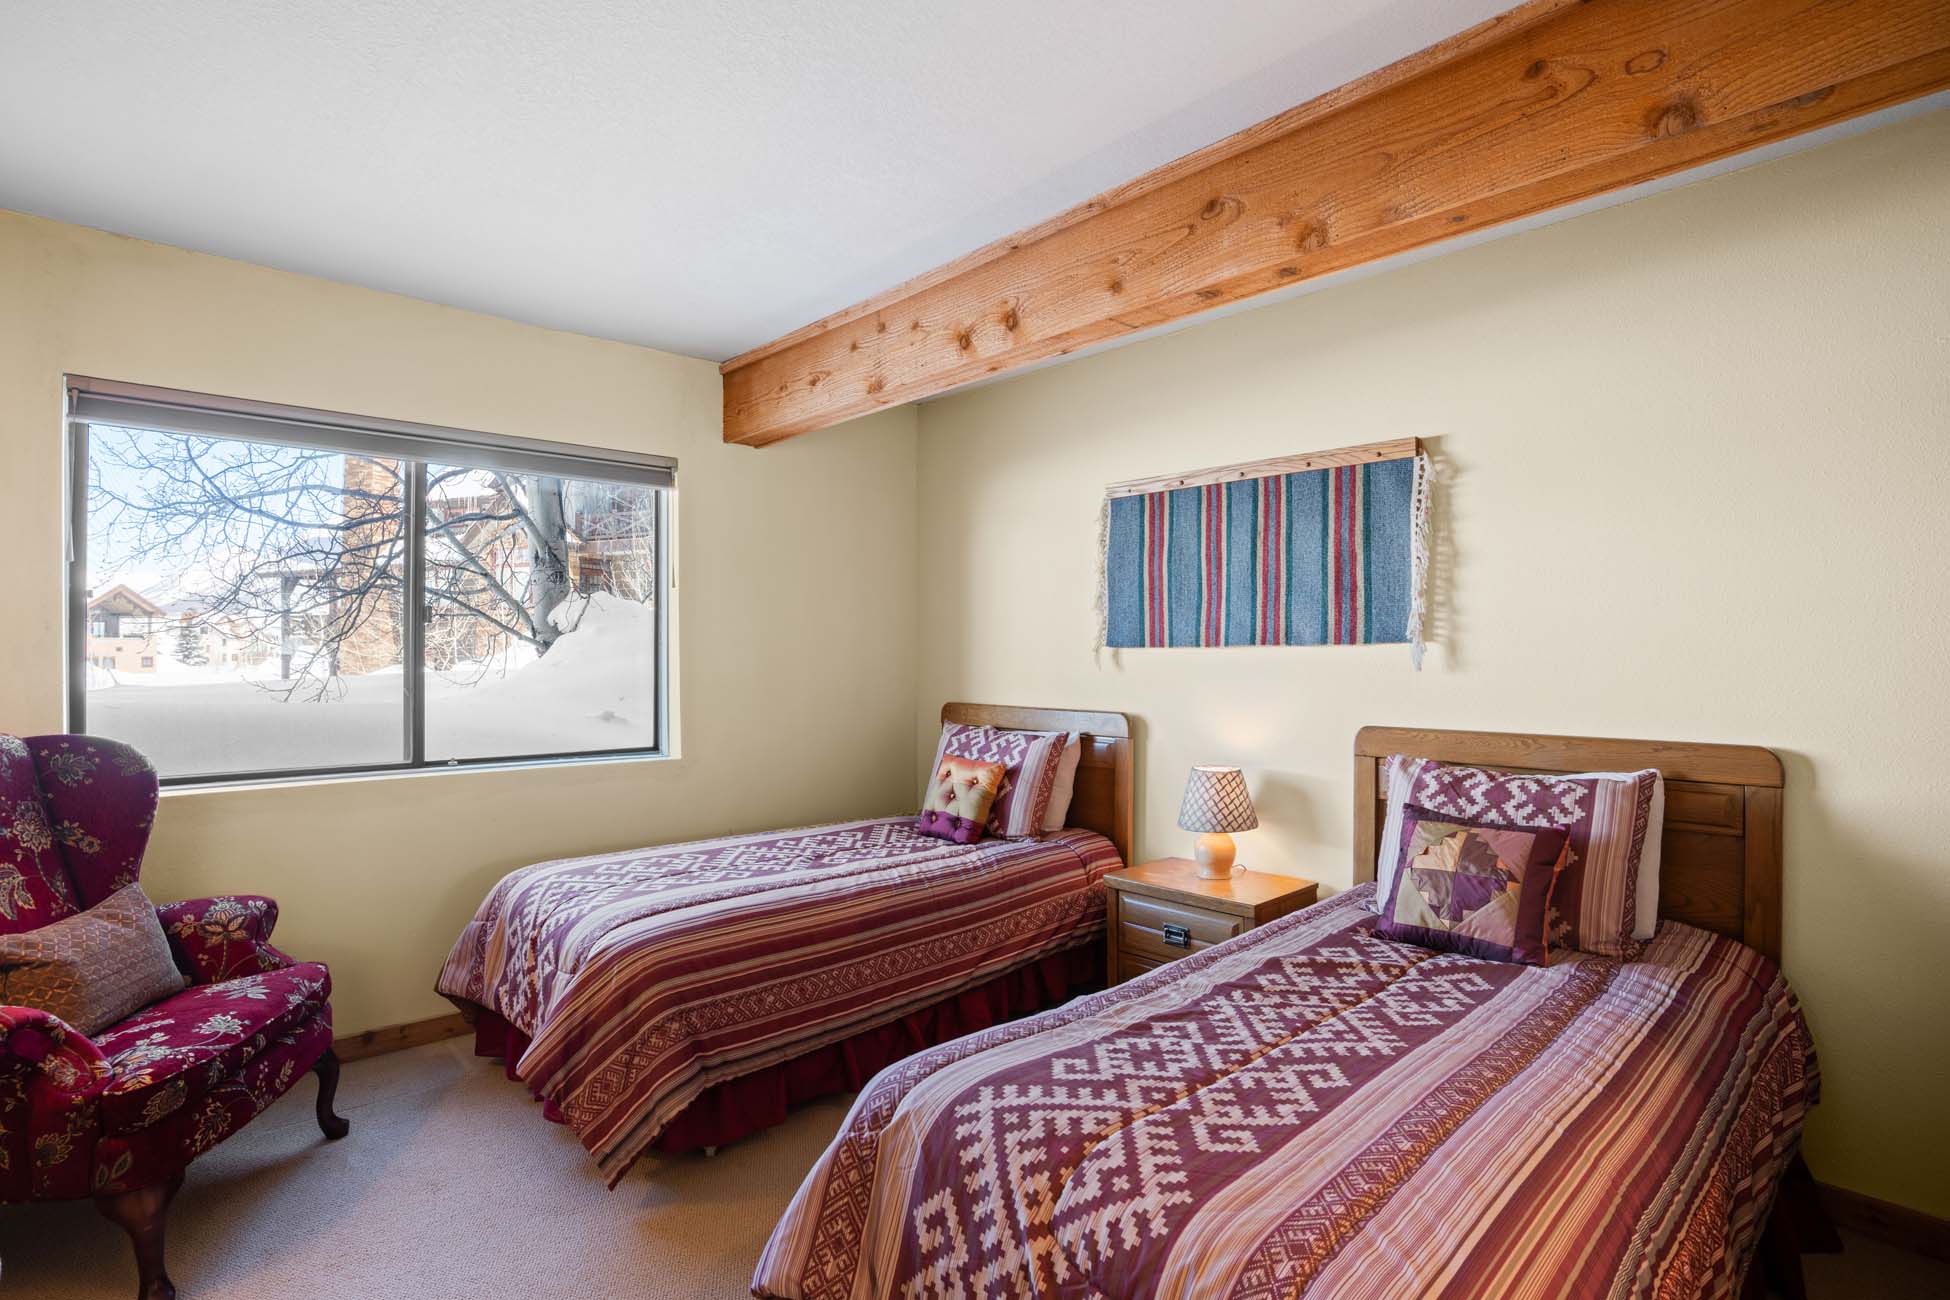 49 Powderview Drive, Crested Butte Colorado -bedroom